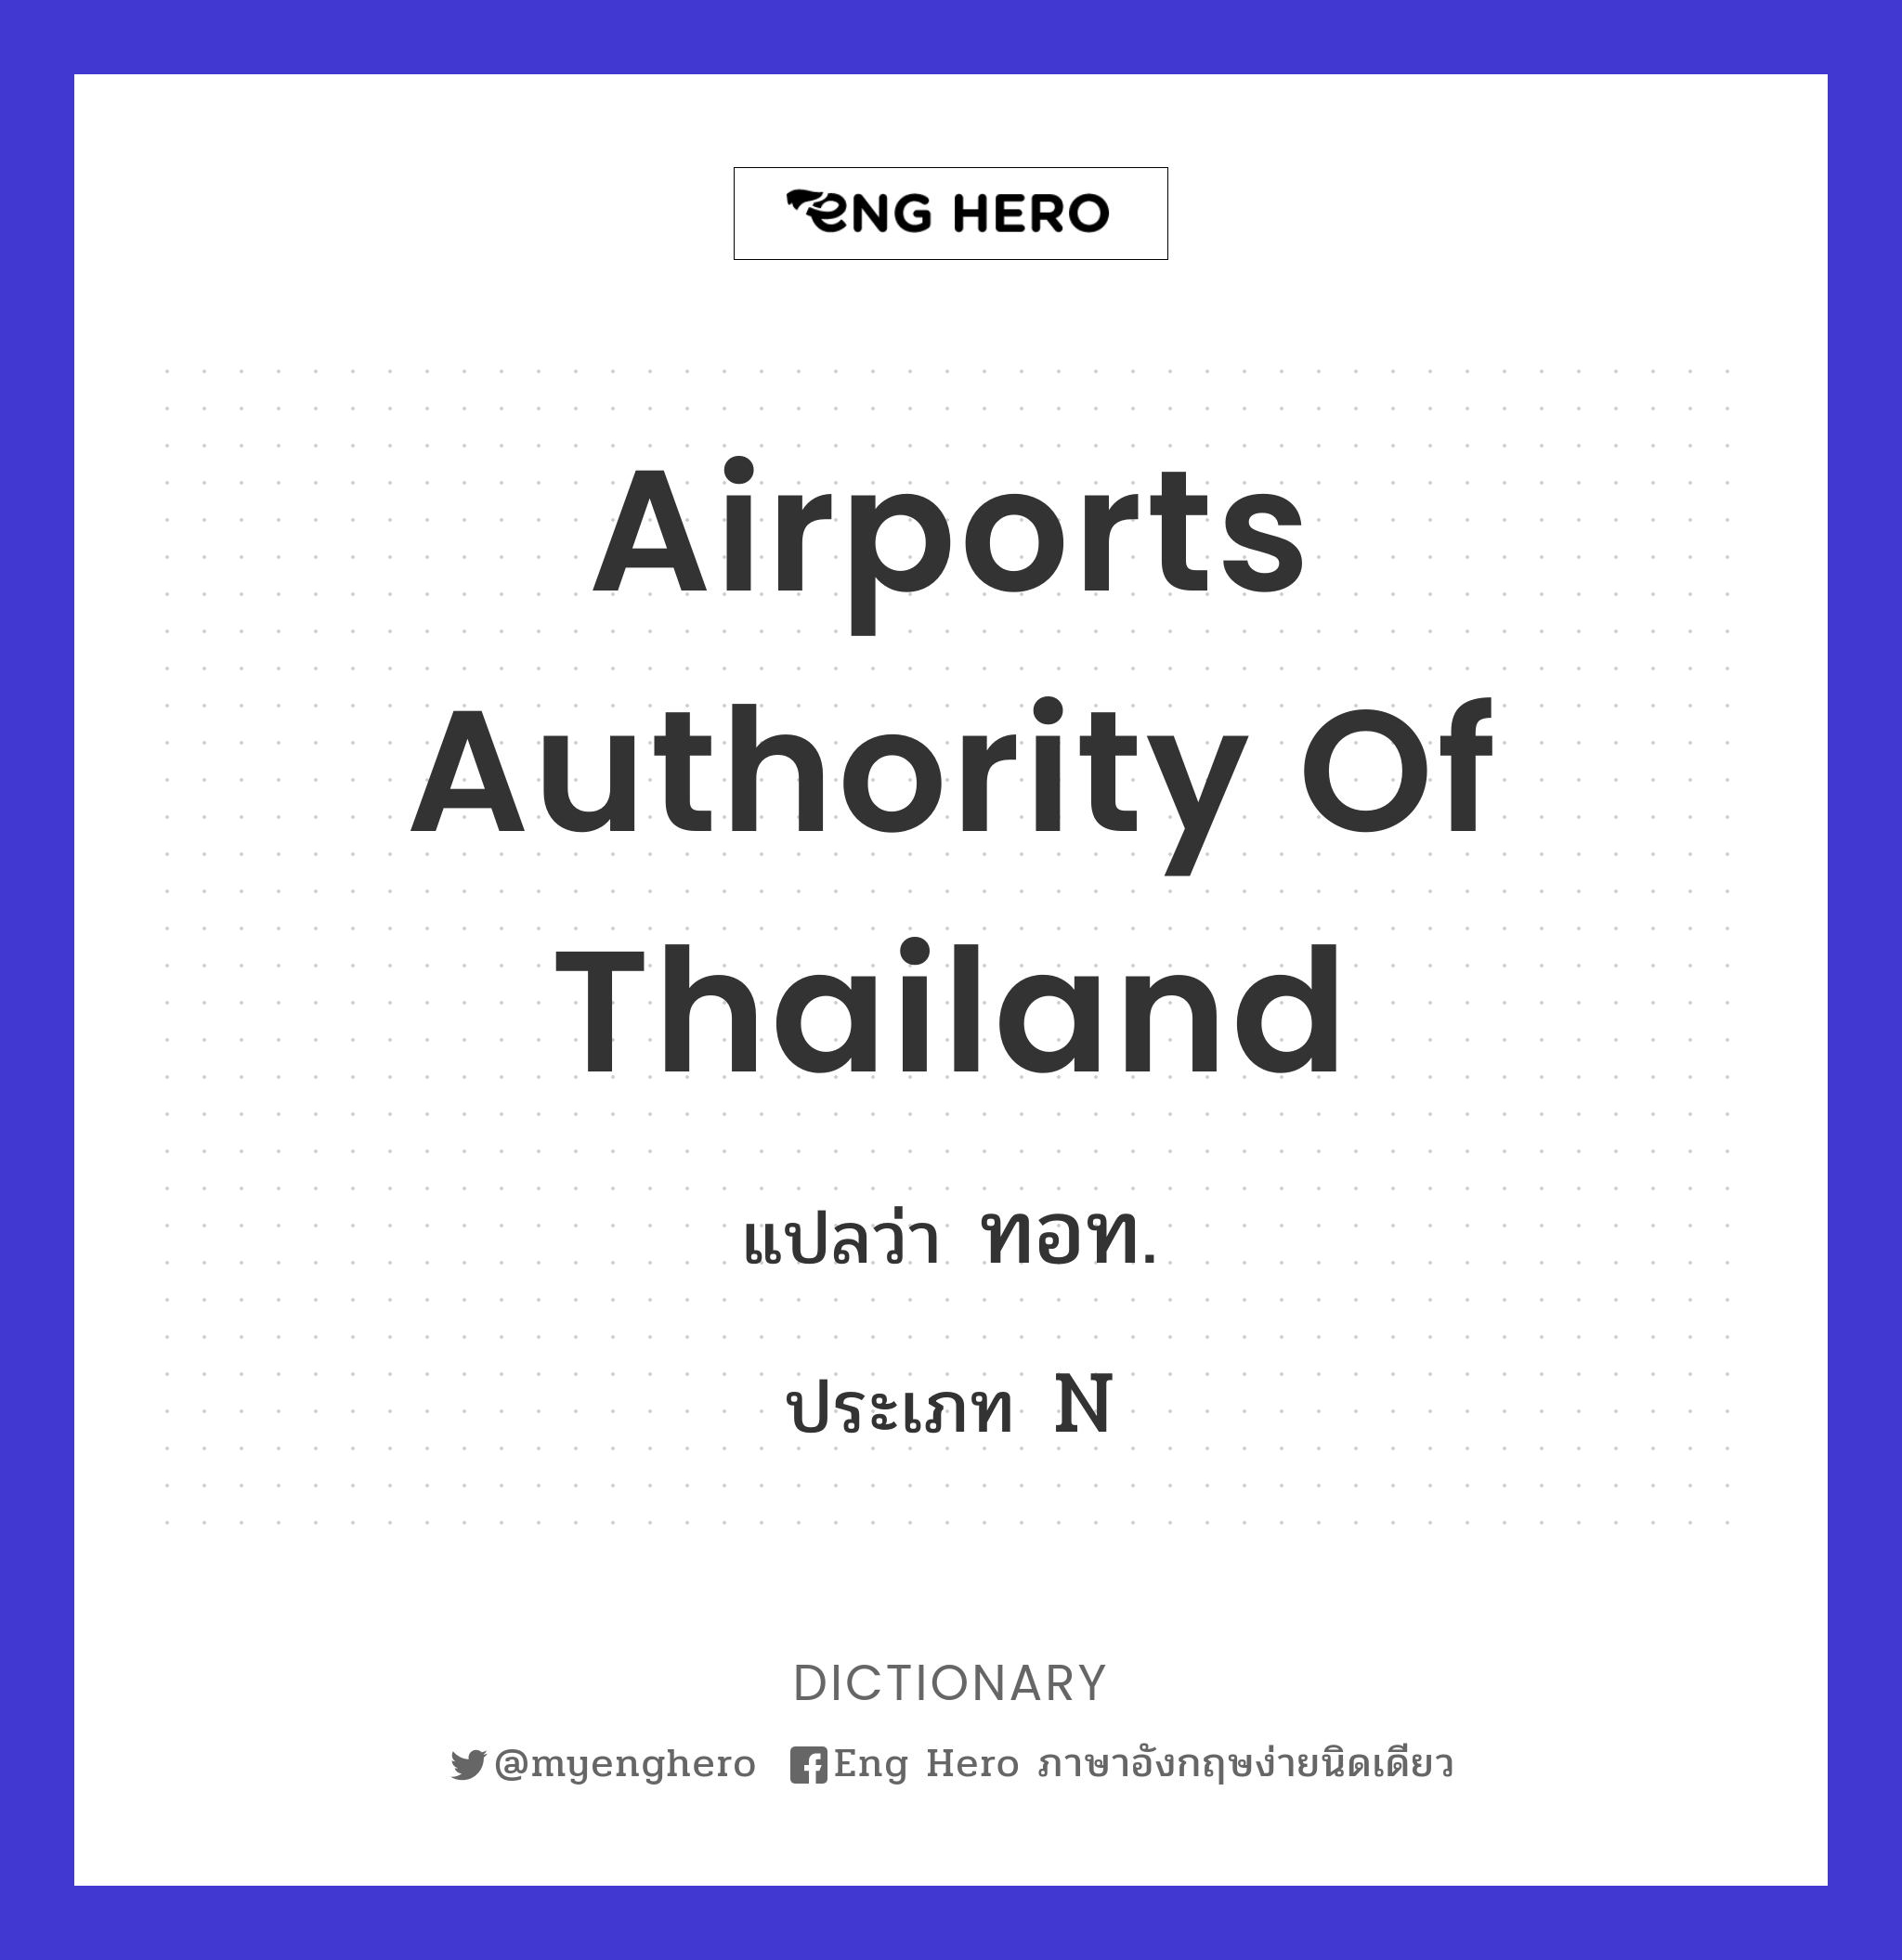 Airports Authority of Thailand